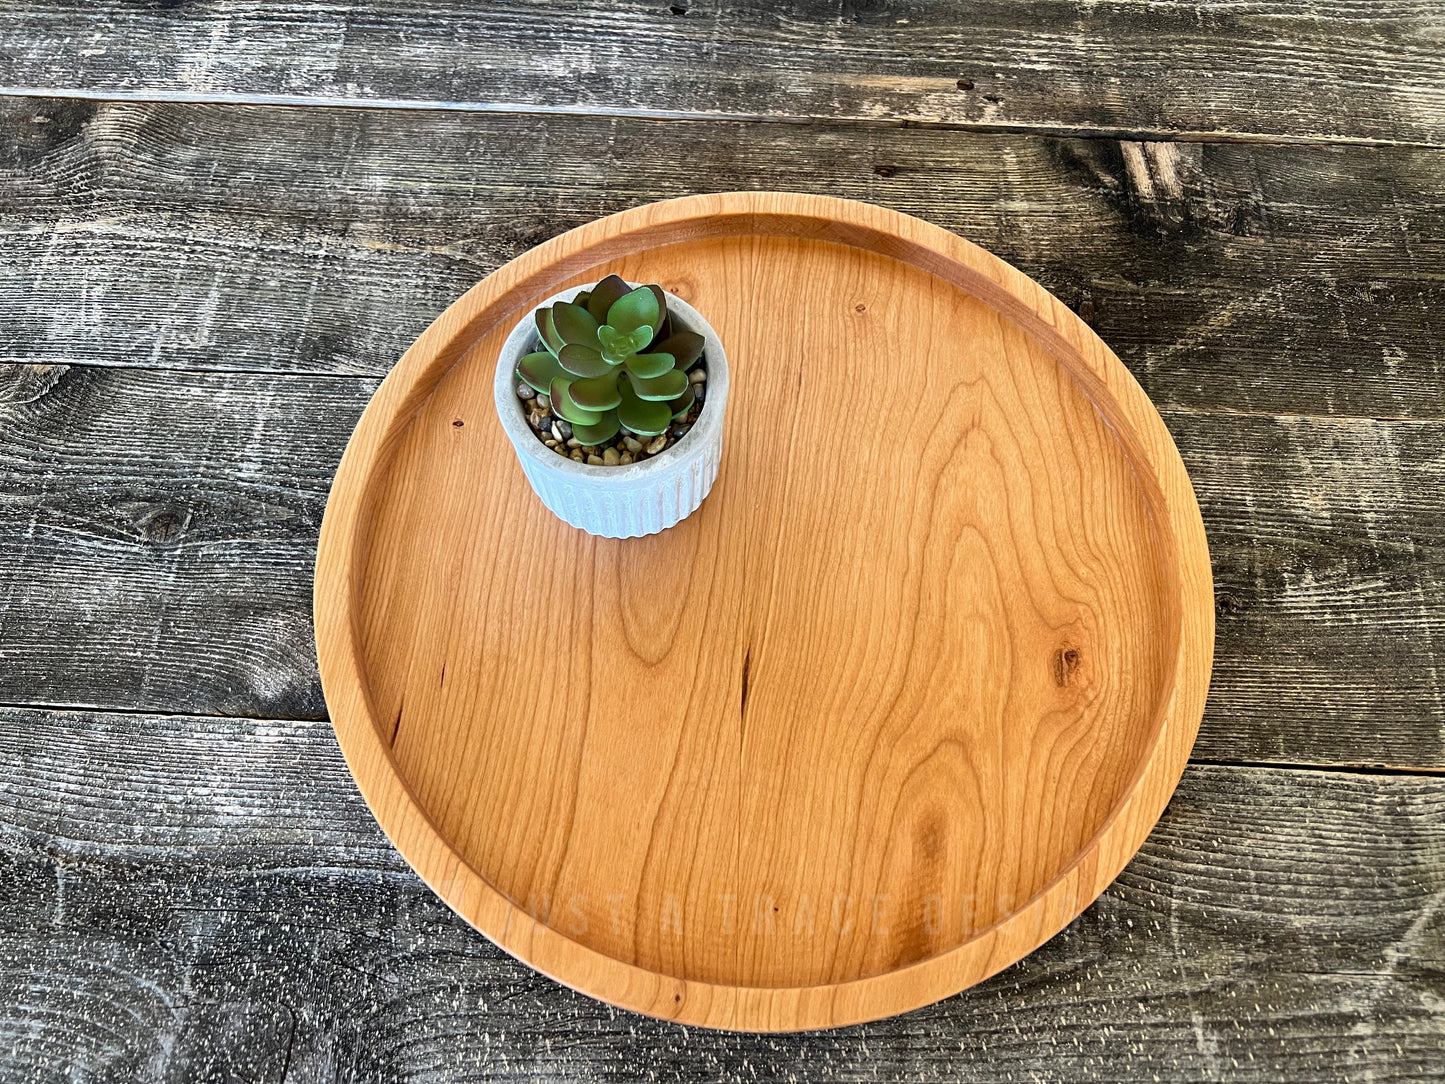 12" Round Cherry Grazing Board Tray, Charcuterie Board, Coffee Table, Ottoman Tray, Wood Platter, Serving Tray, Wood Dish, Handmade Gift